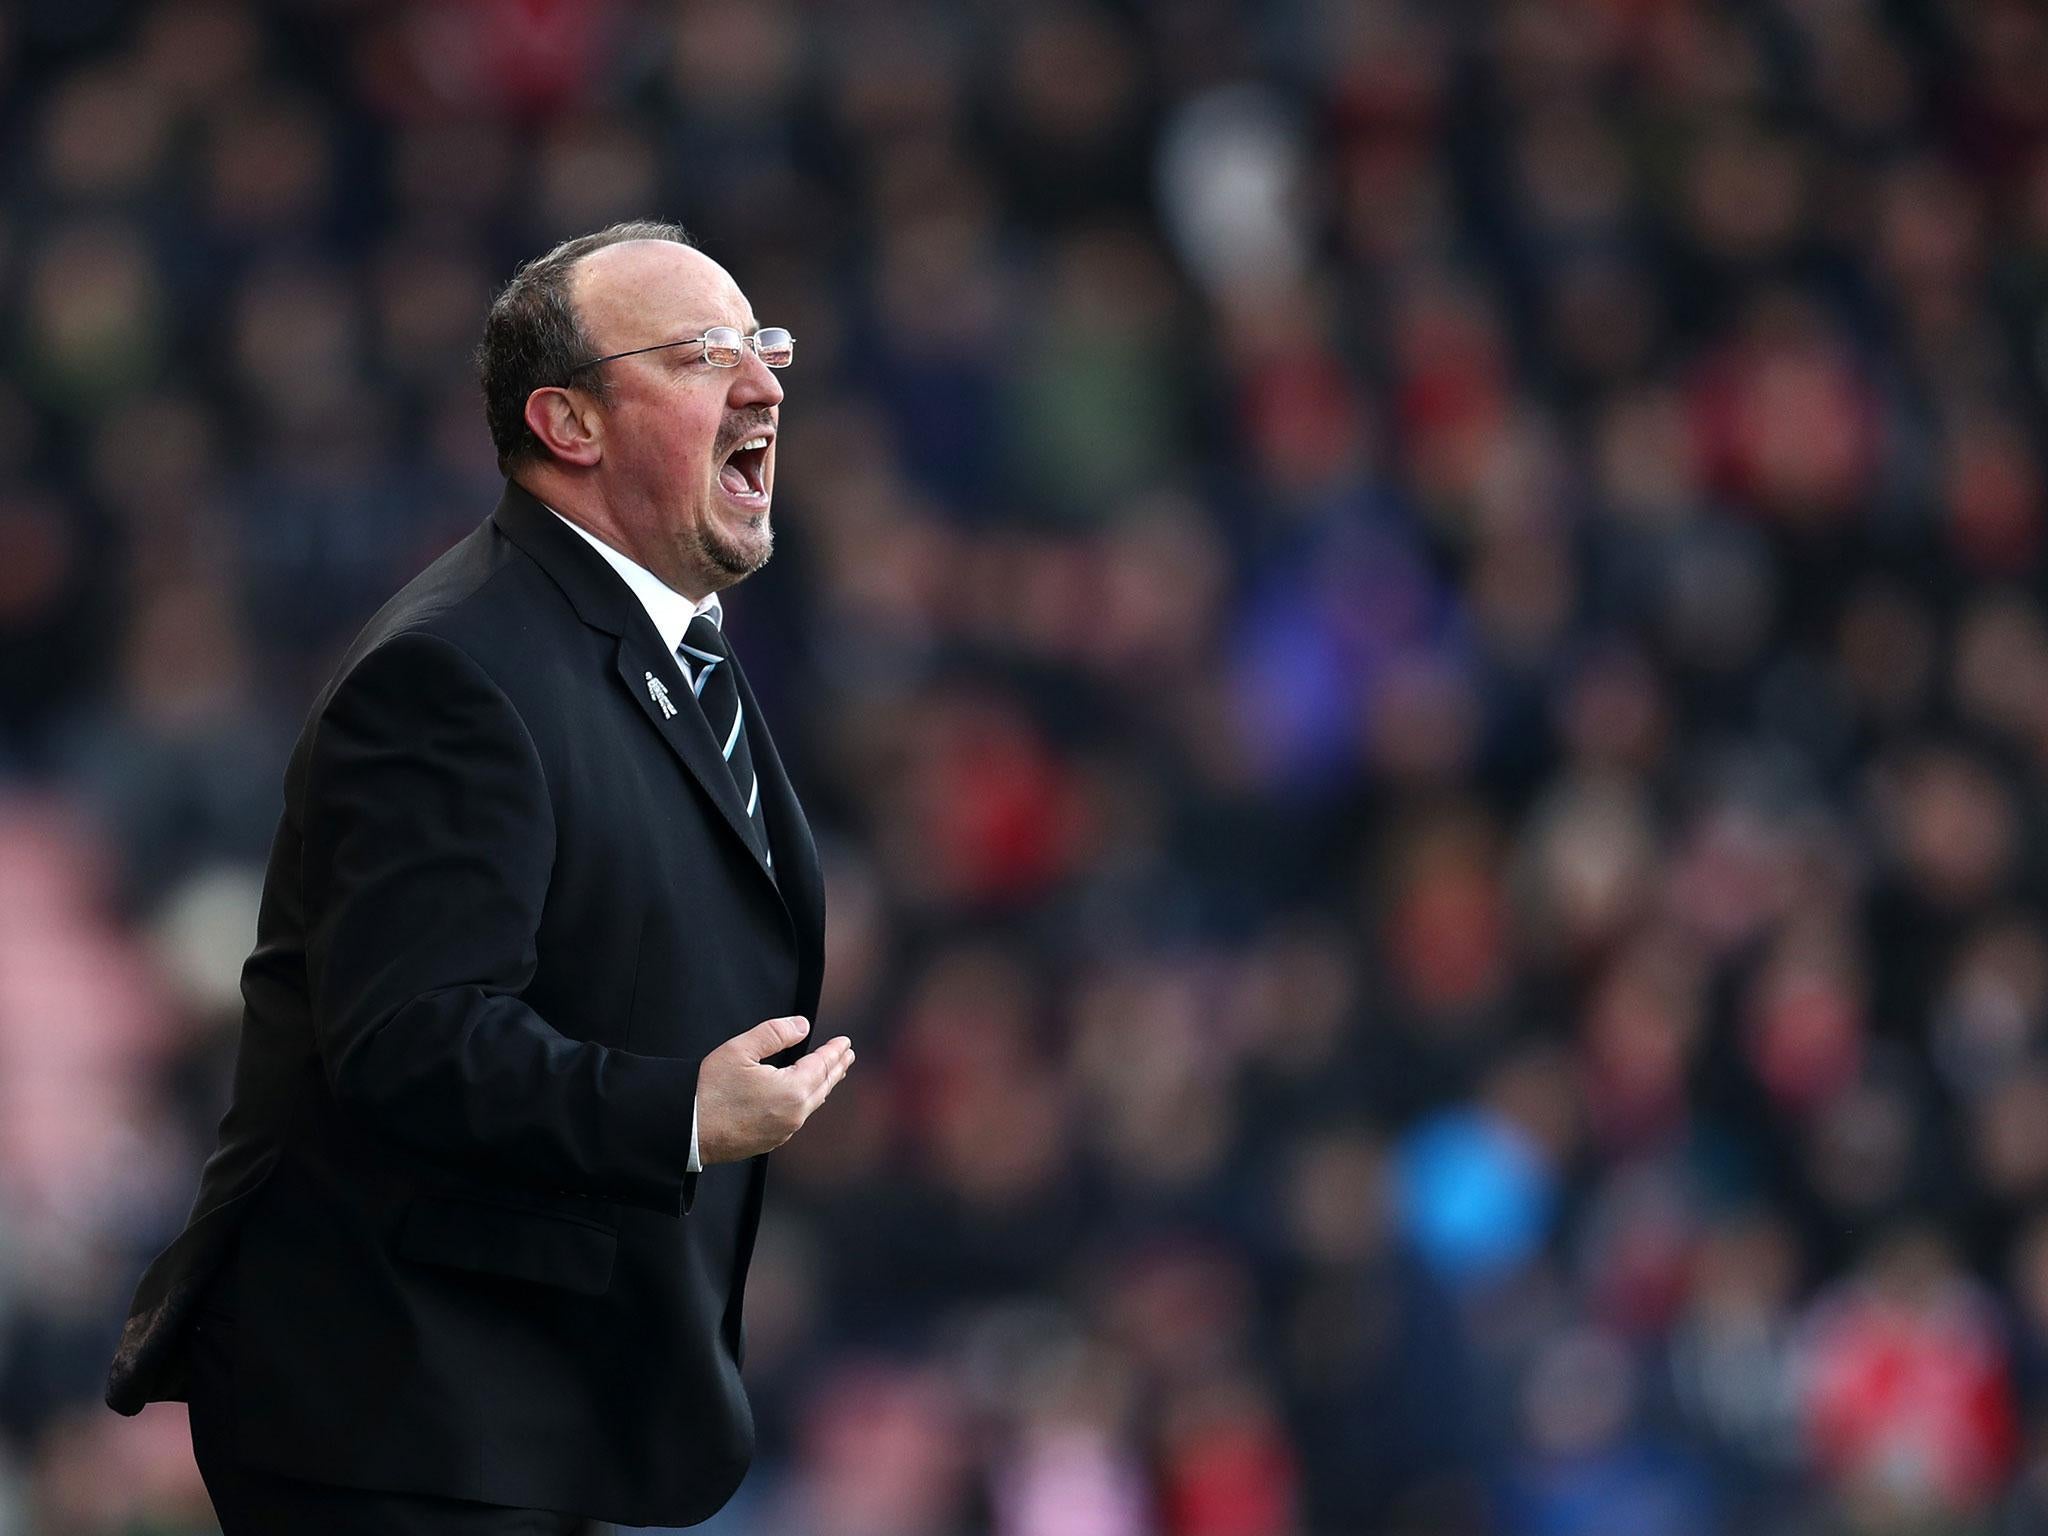 With the relegation battle heating up, Rafa Benitez knows his side must salvage something from Saturday's game